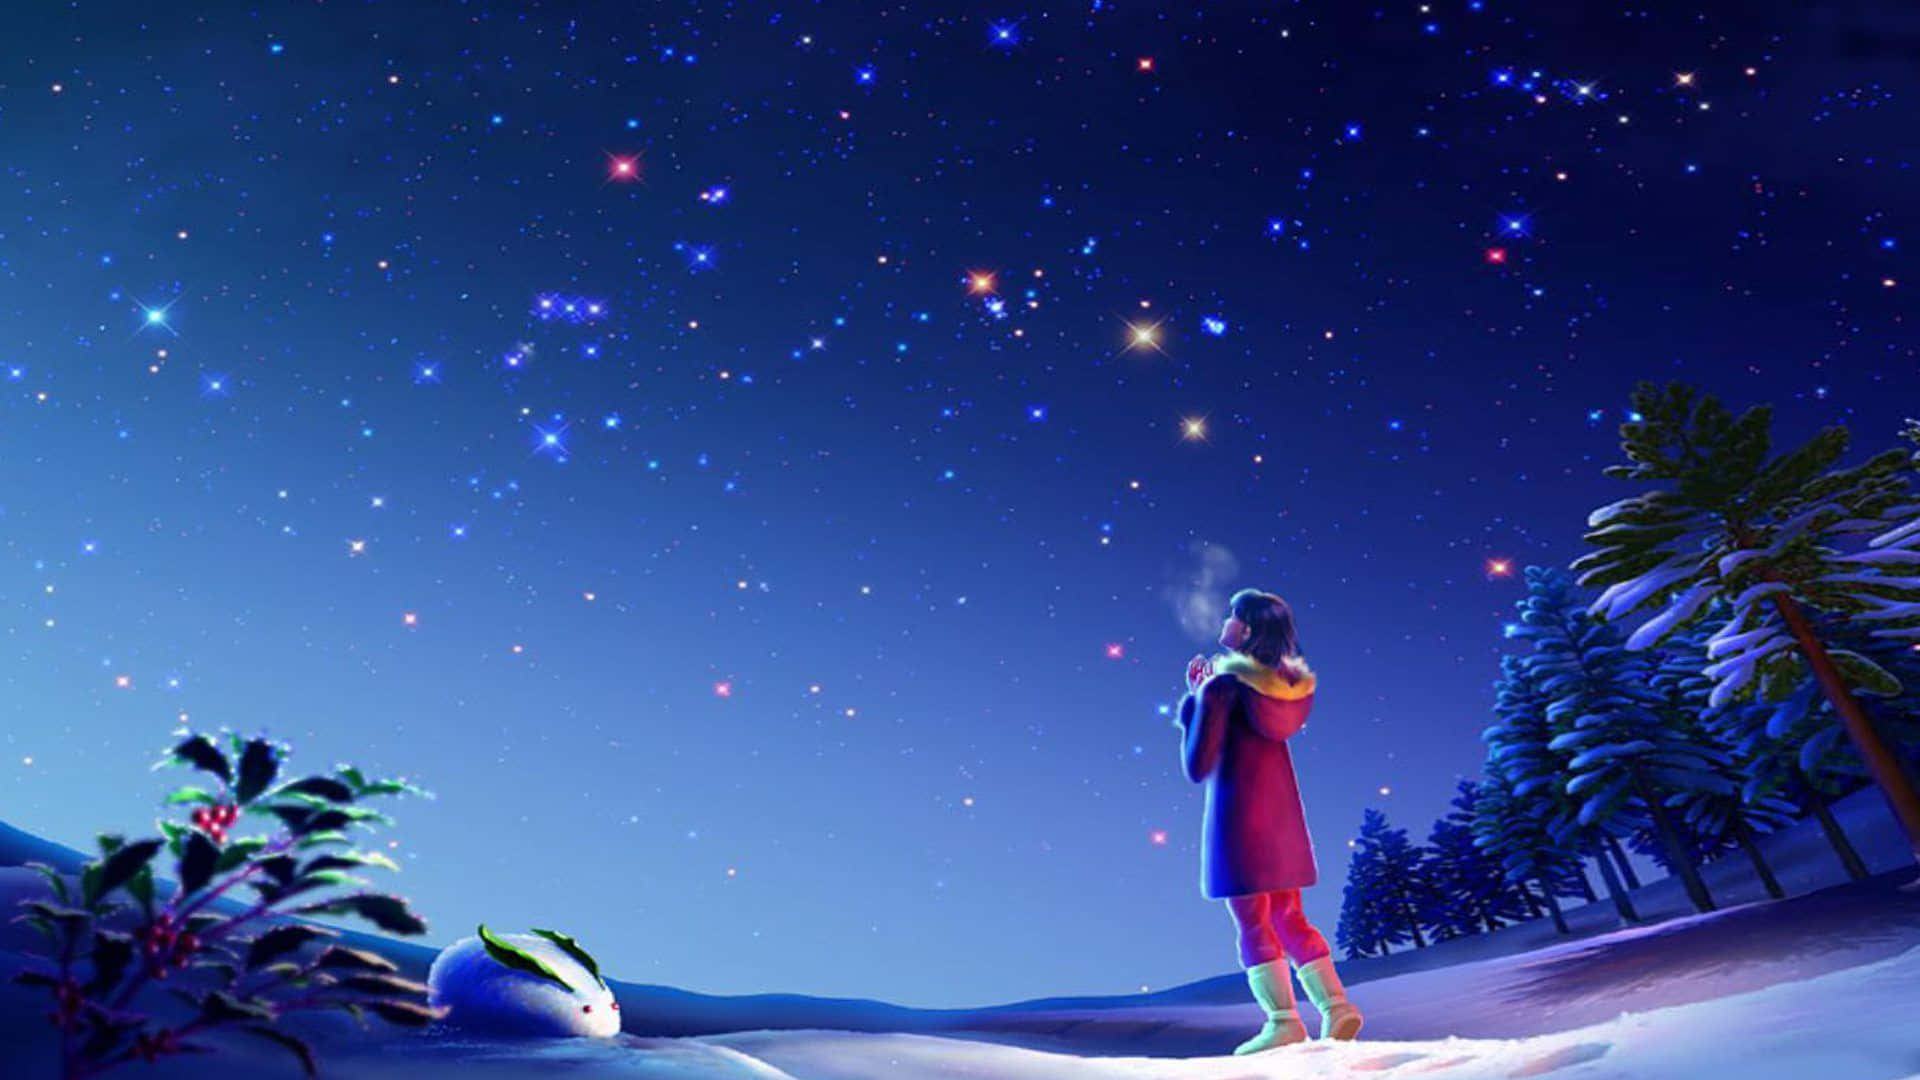 Magical Night Sky With Girl Looking At Sky Background